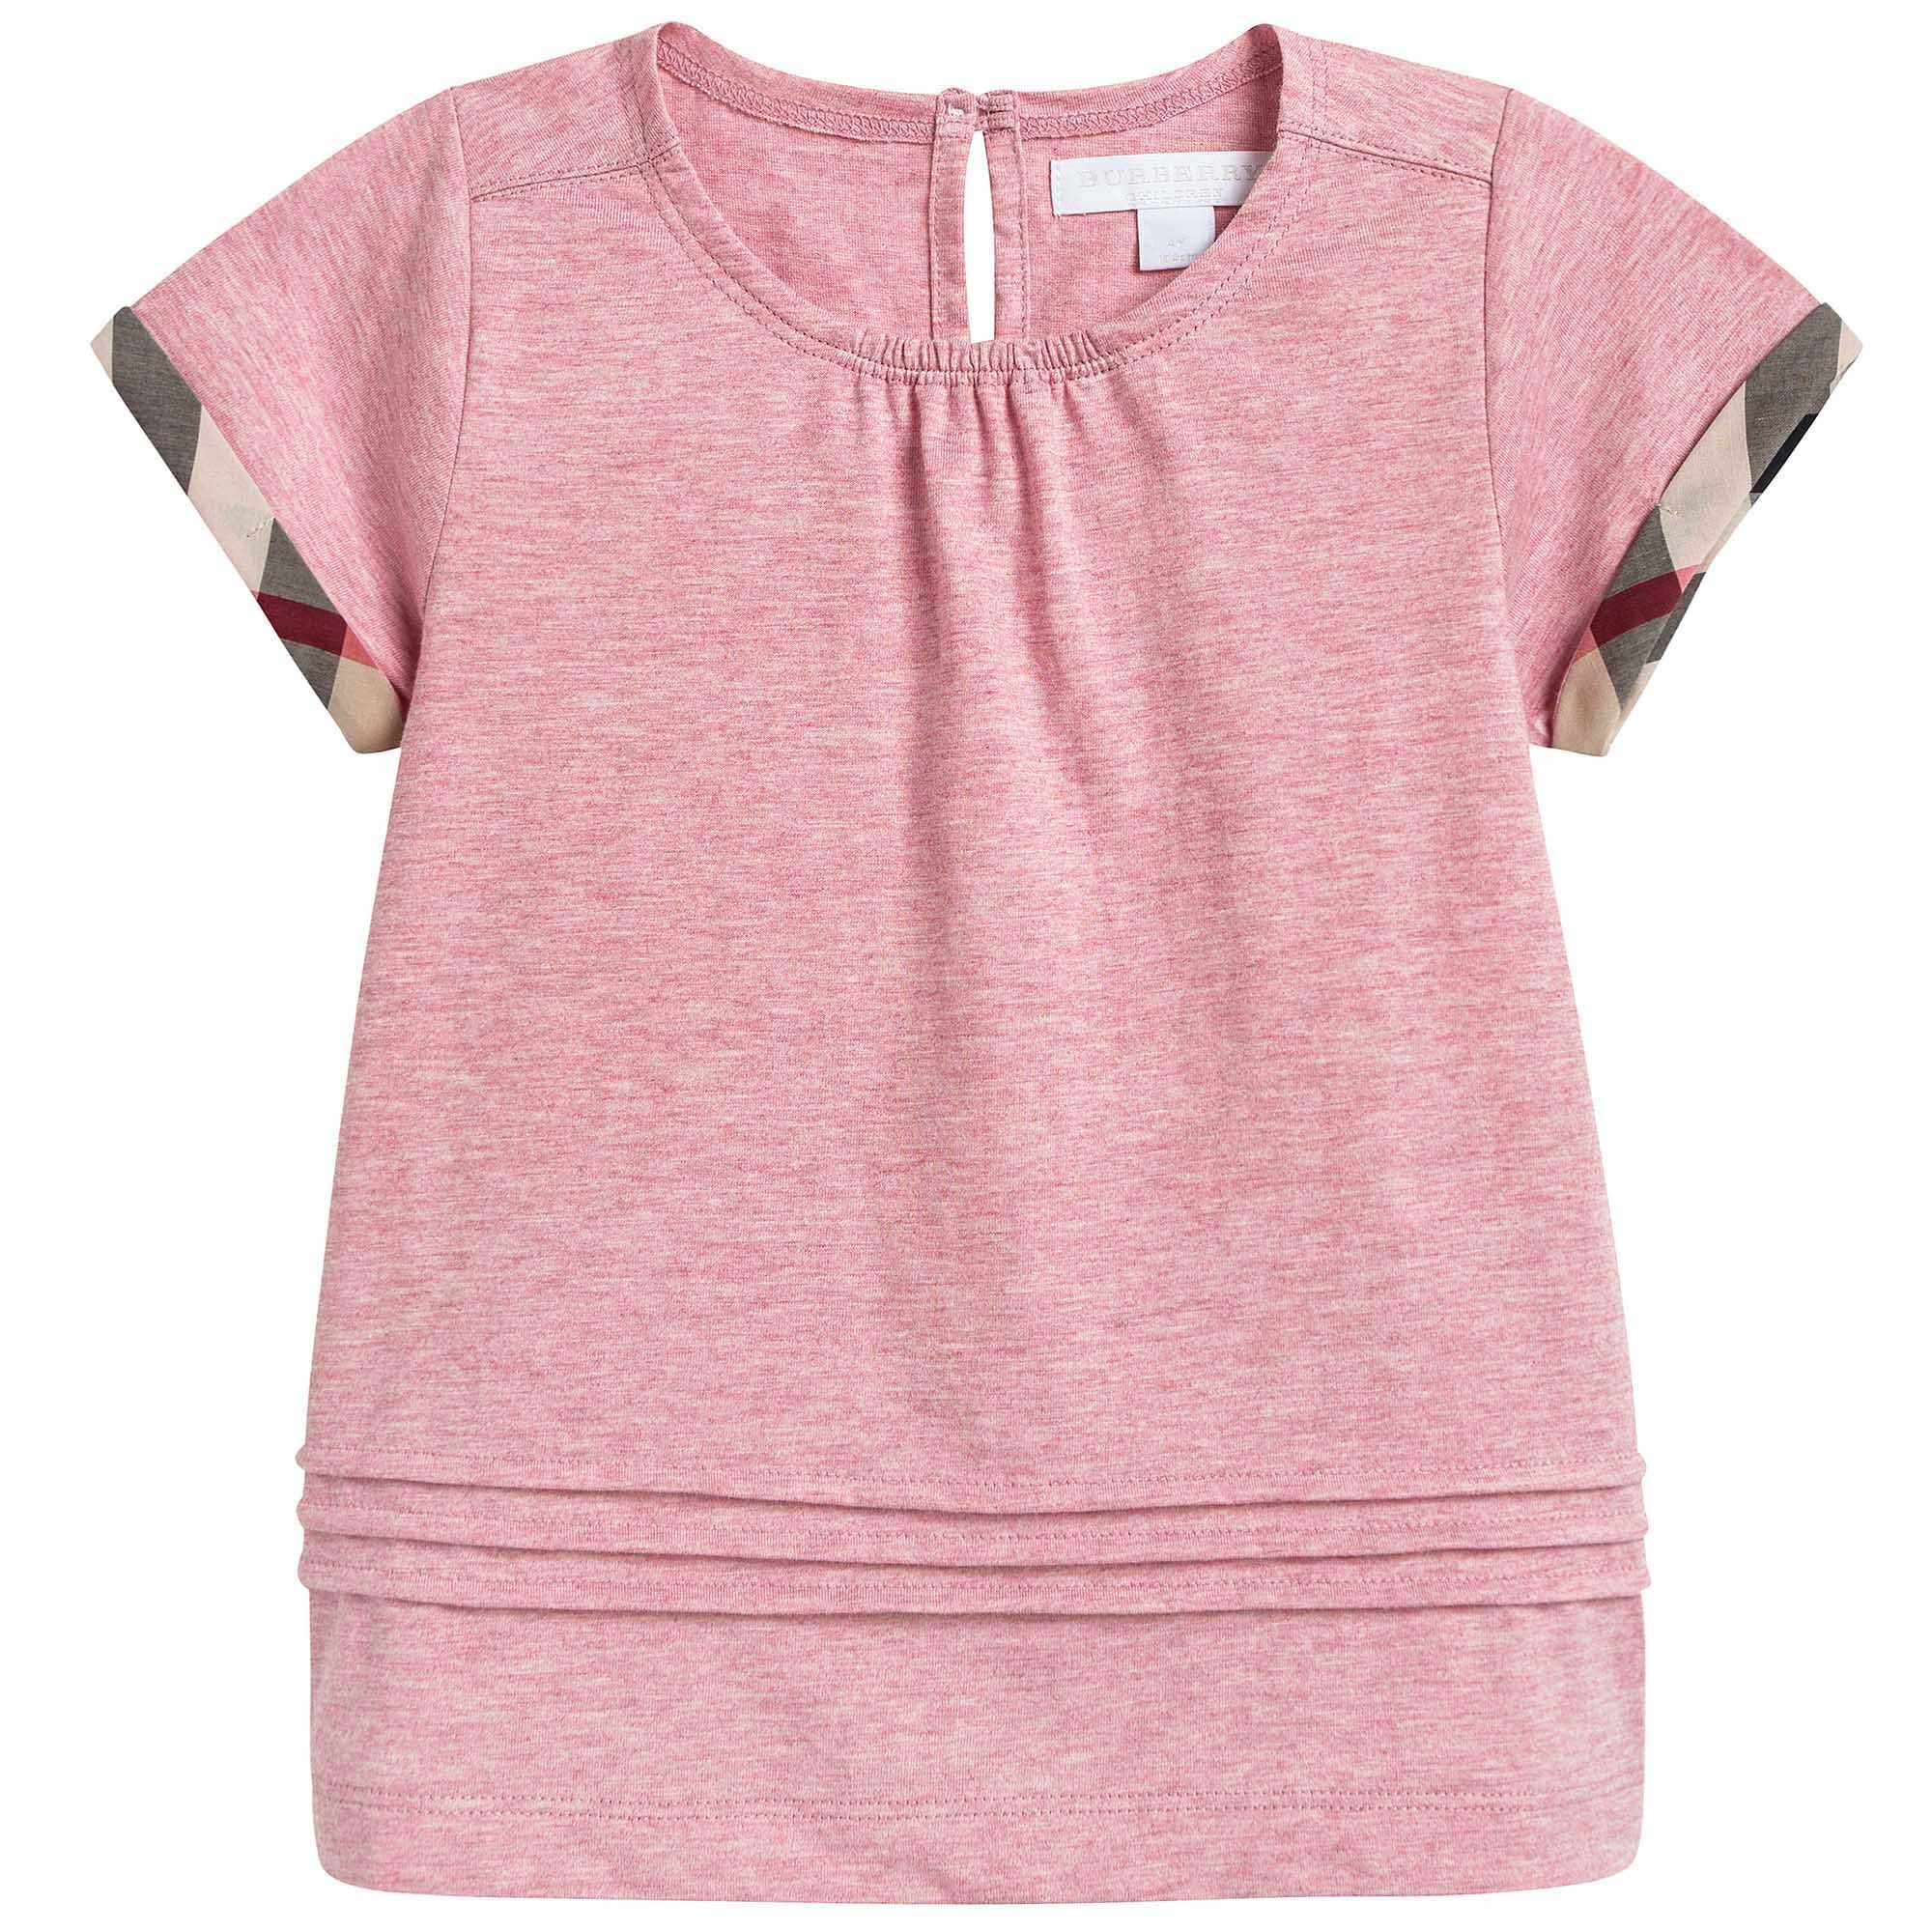 Girls Pink T-Shirt with Check Trim